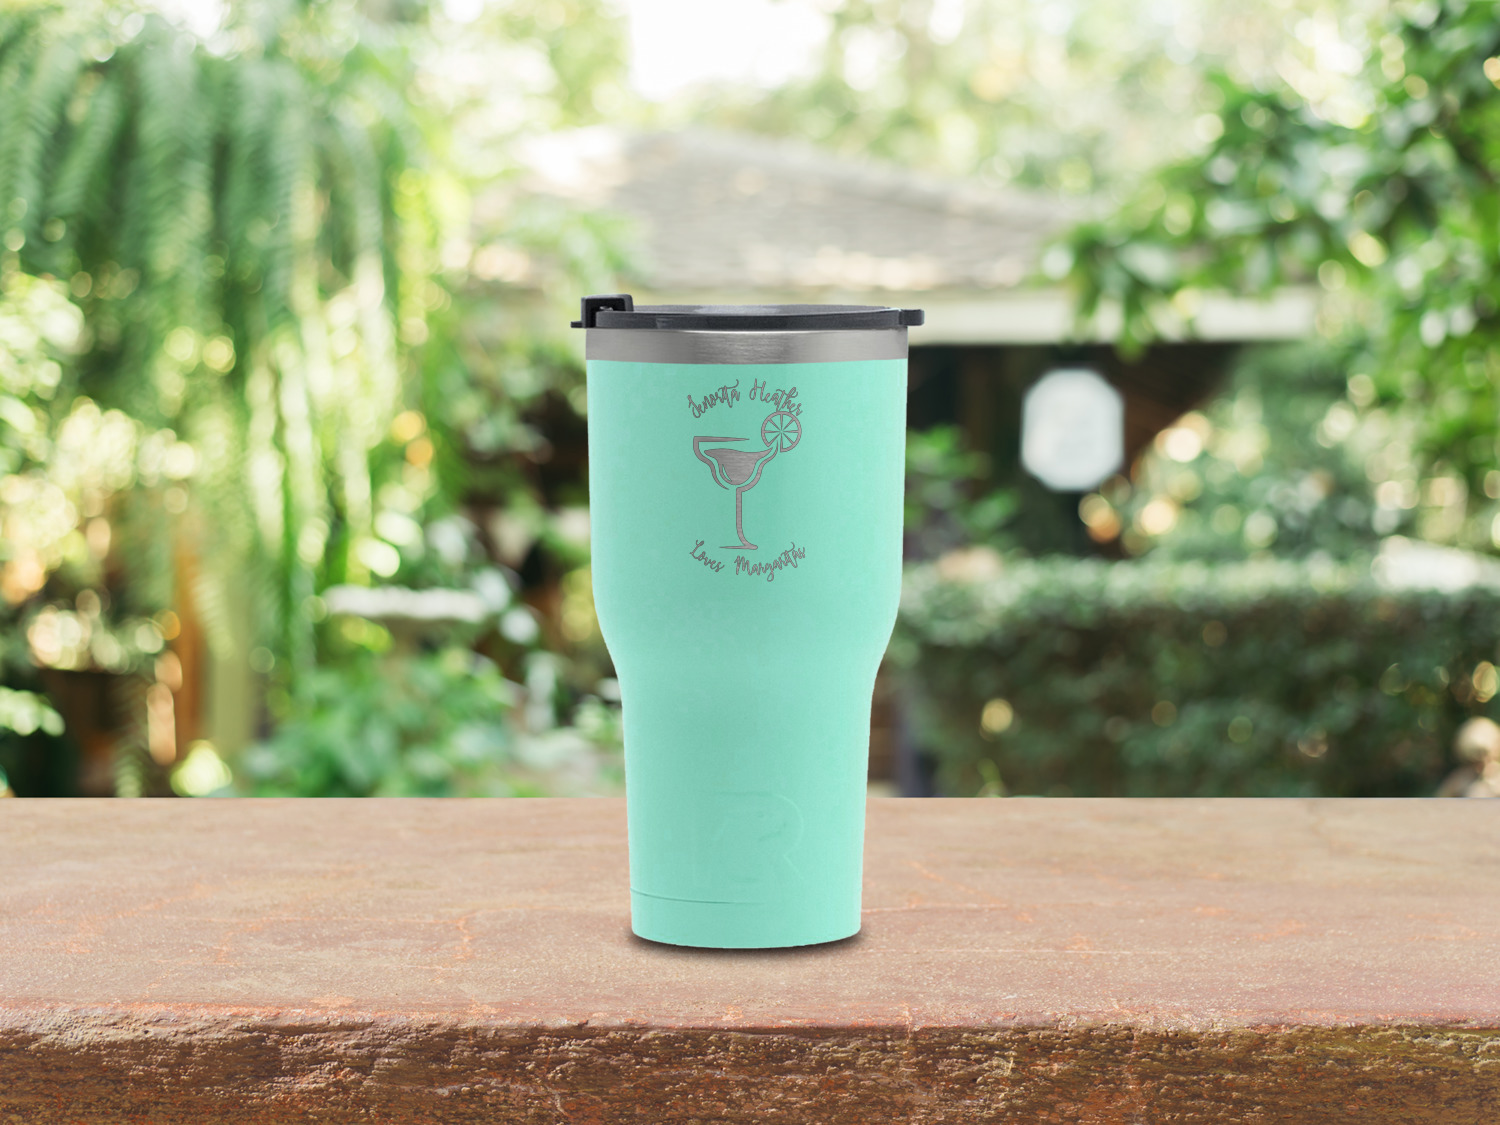 https://www.youcustomizeit.com/common/MAKE/1622723/Margarita-Lover-Teal-RTIC-Tumbler-Lifestyle-Front.jpg?lm=1628728815